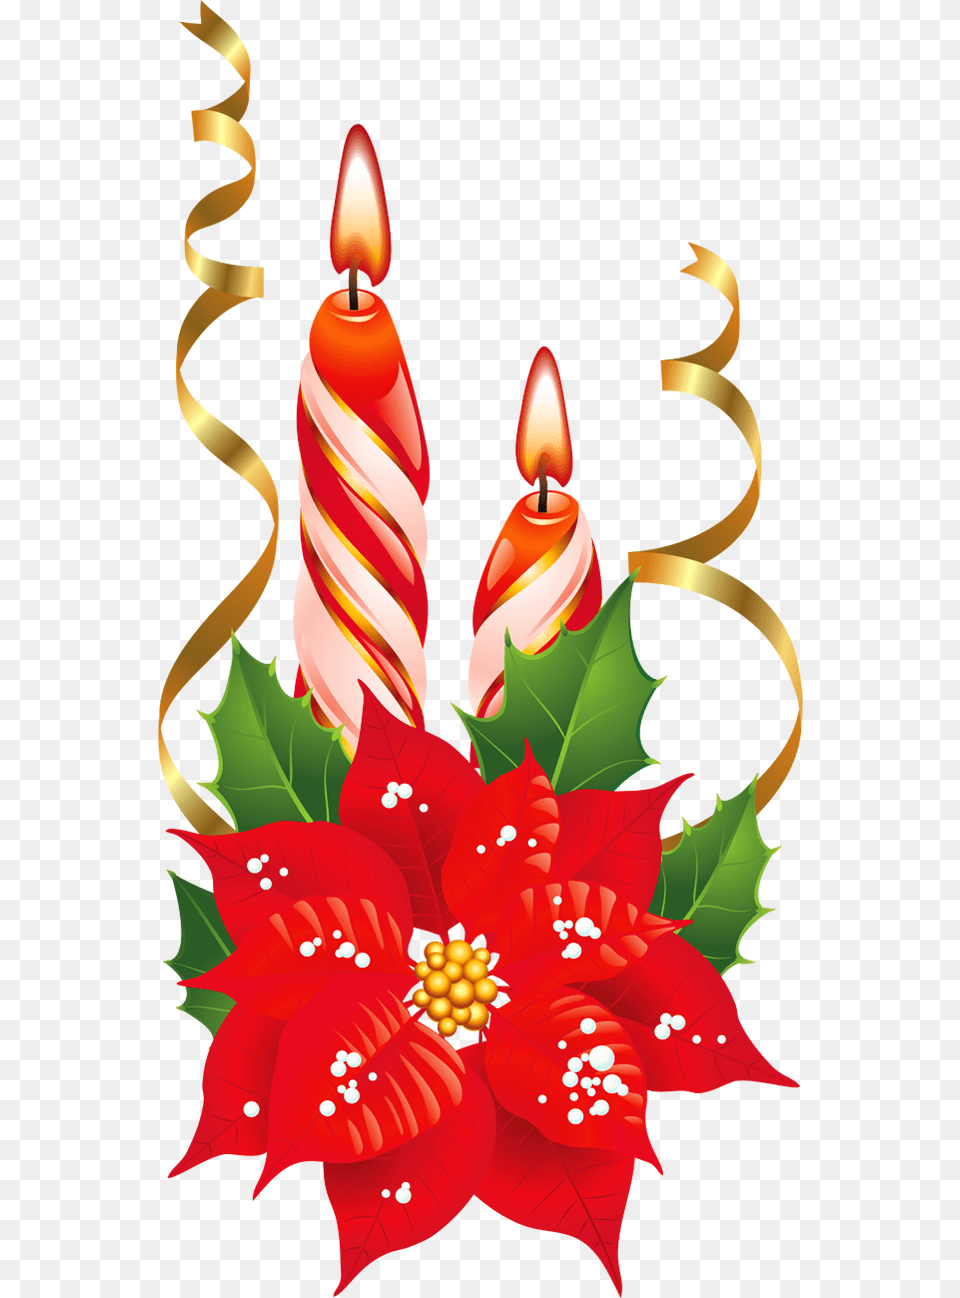 Red And White Christmas Candles With Poinsettia Christmas Candles Clipart, Art, Graphics Png Image